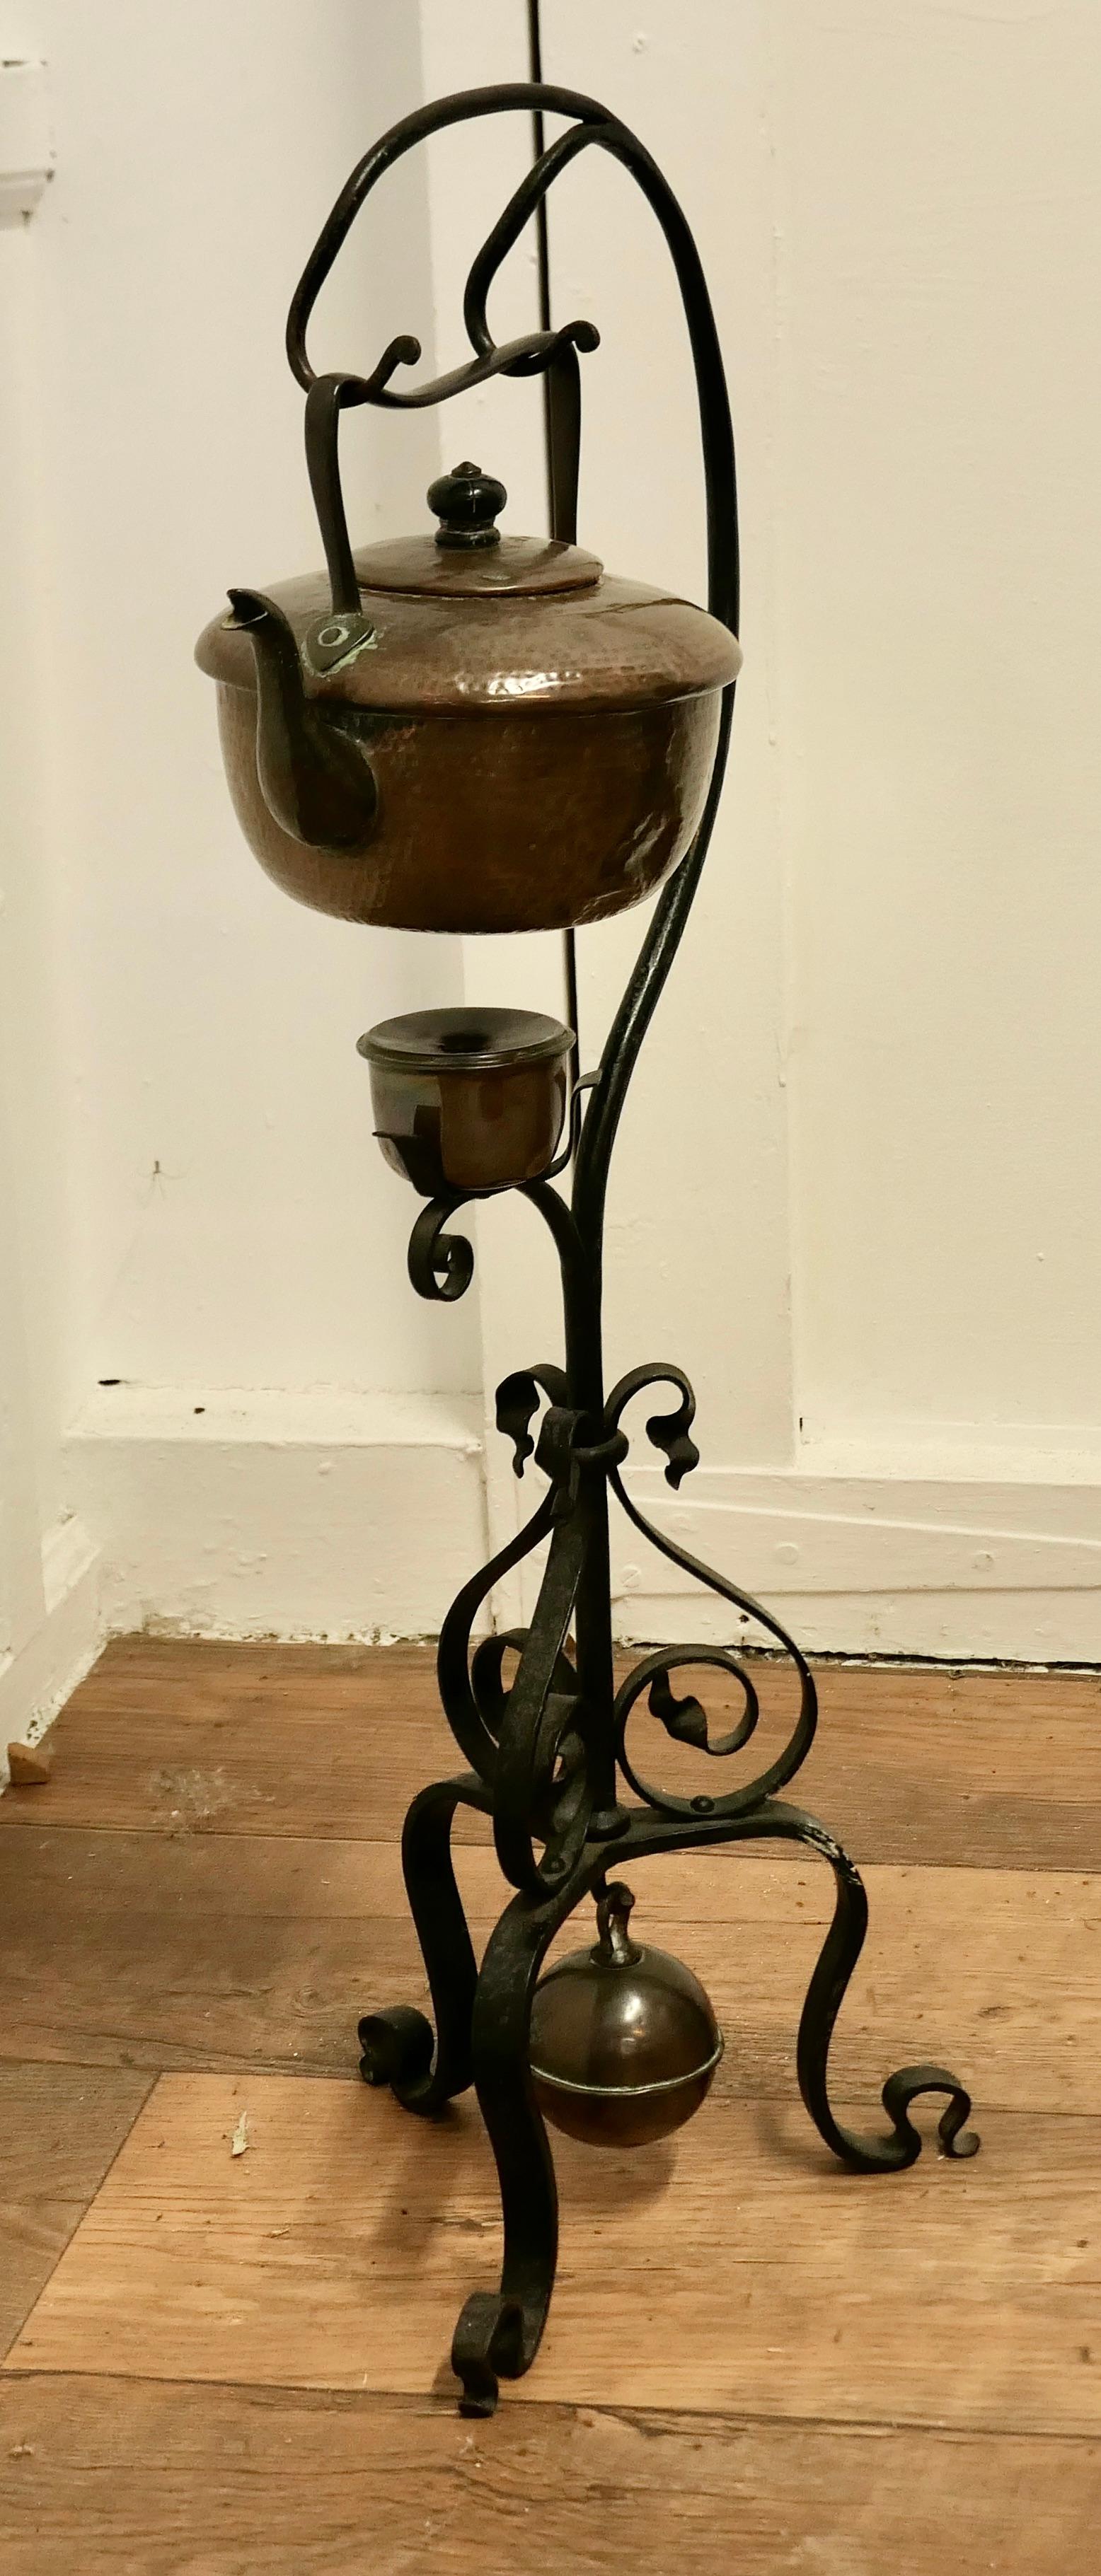 Late 19th Century 19th Century Copper Swinging Sprit Kettle on a Wrought Iron Stand For Sale